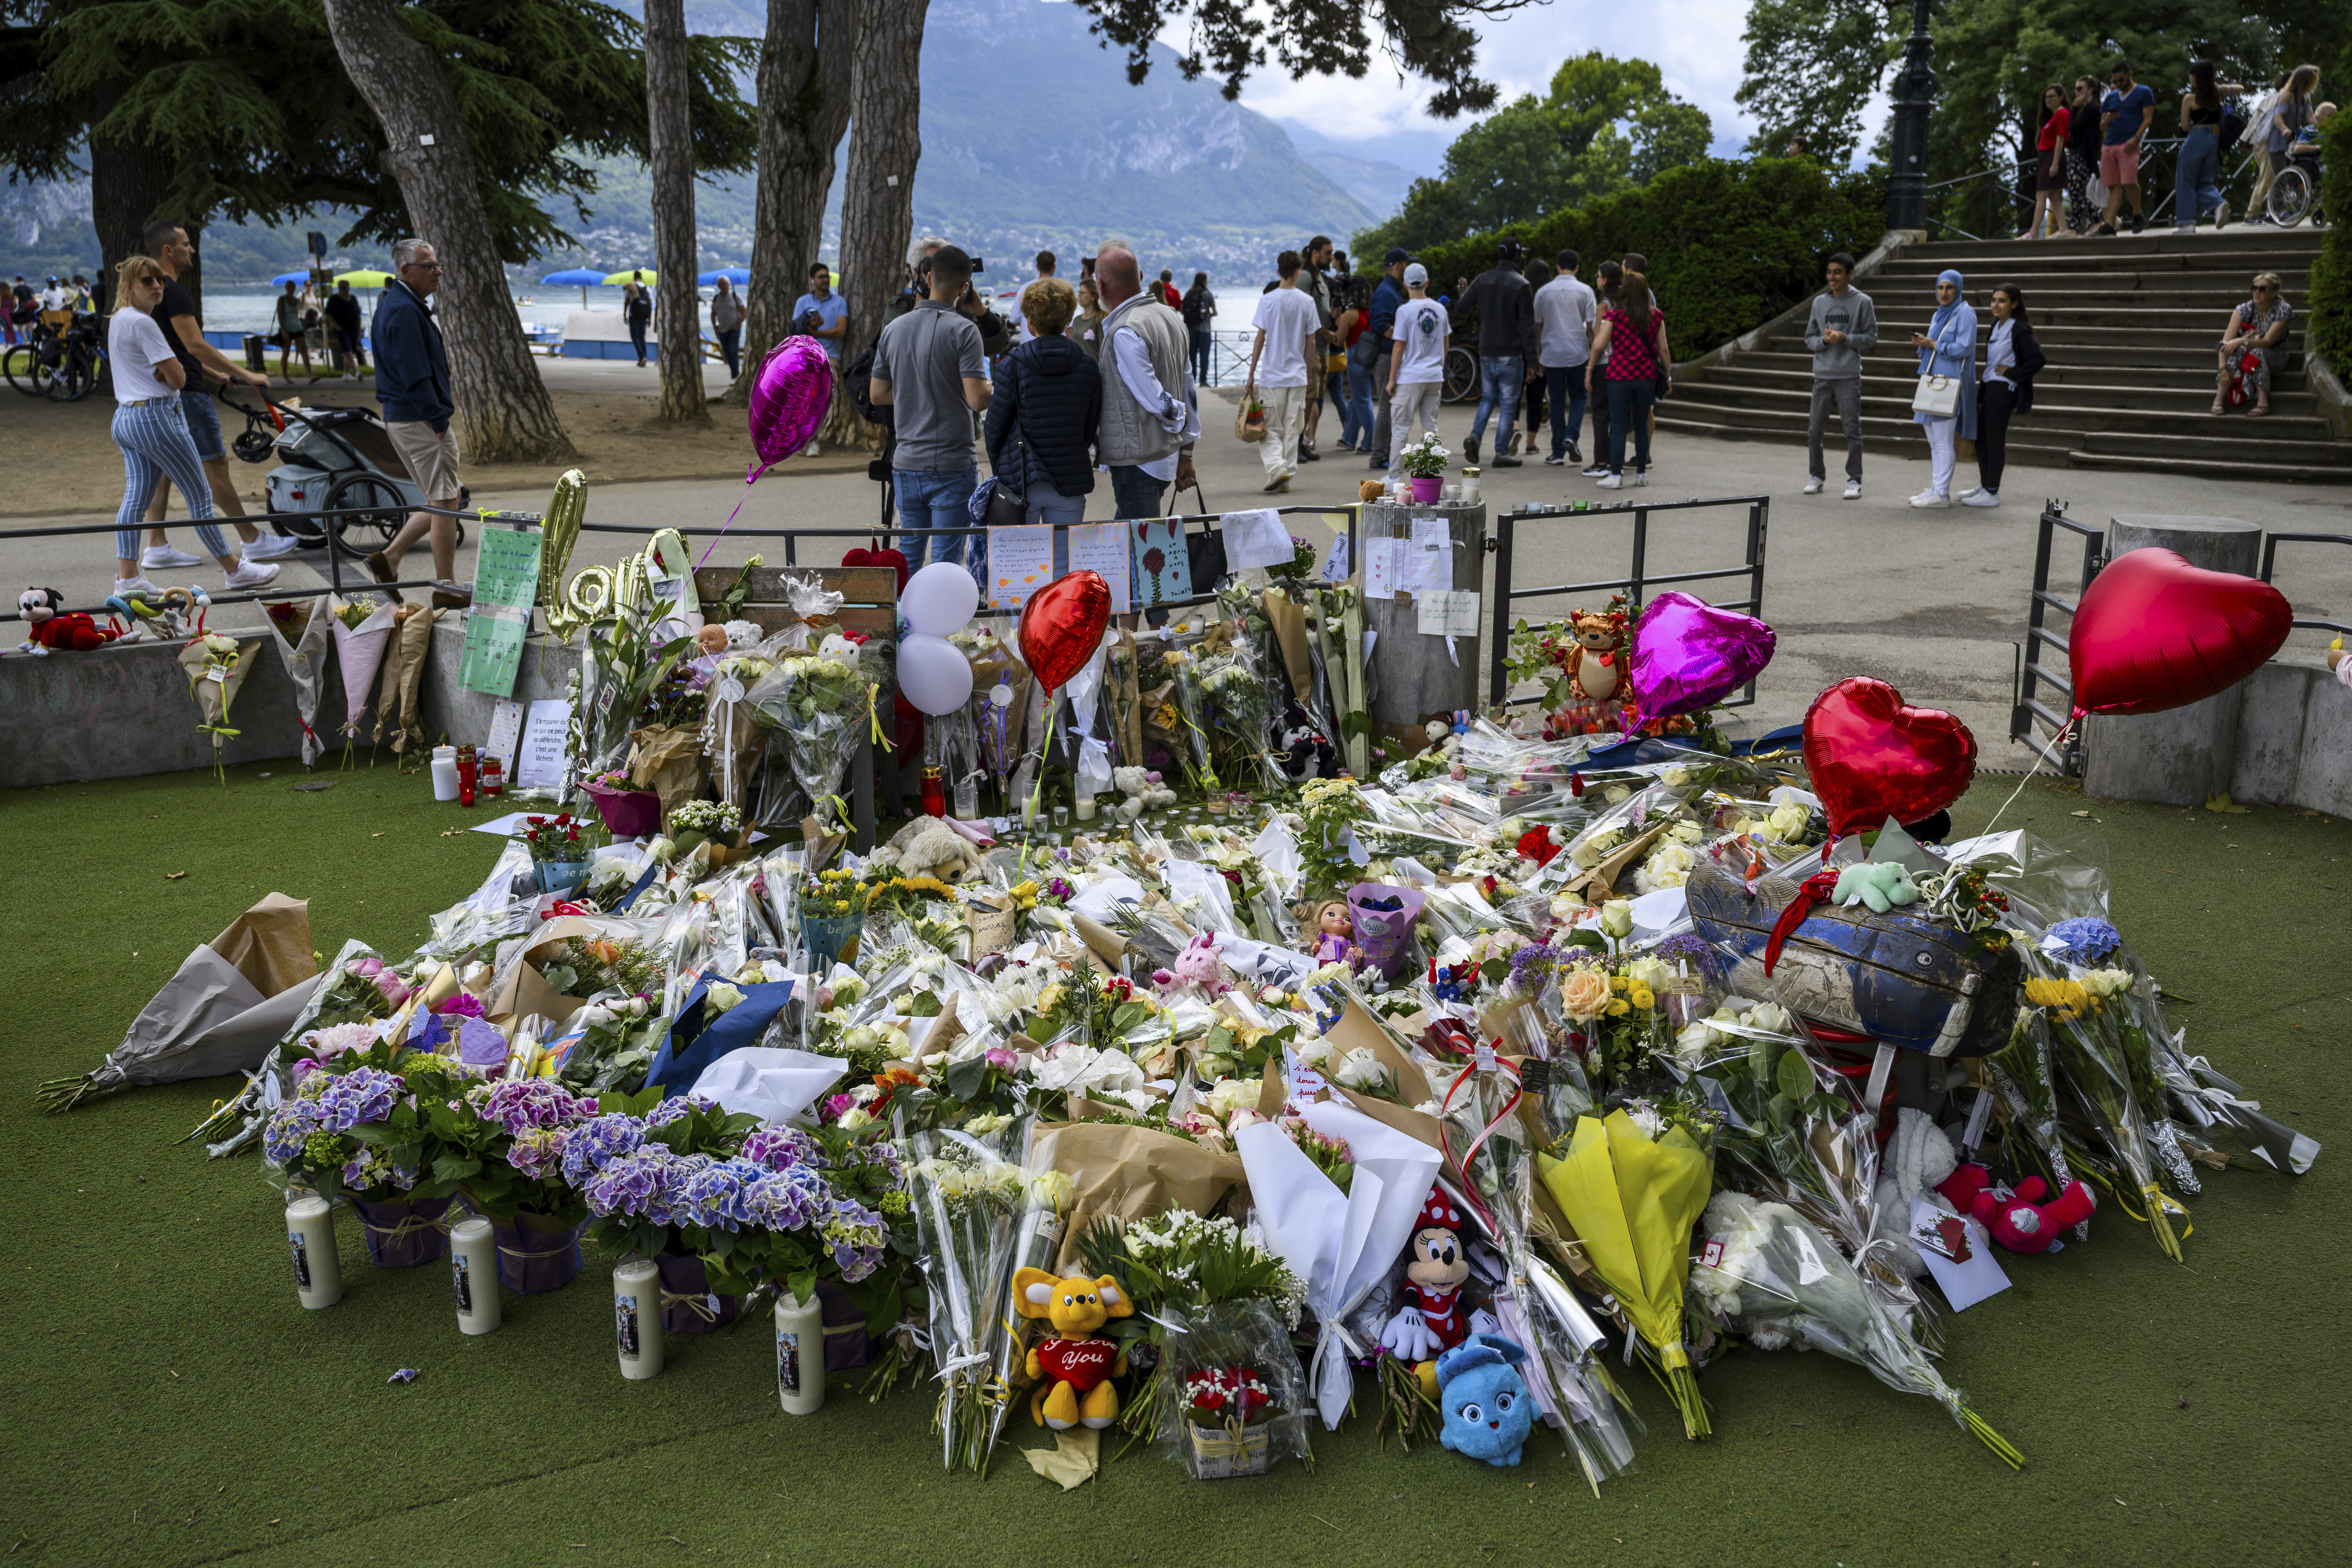 French town gathers at playground where young children were stabbed to support victims